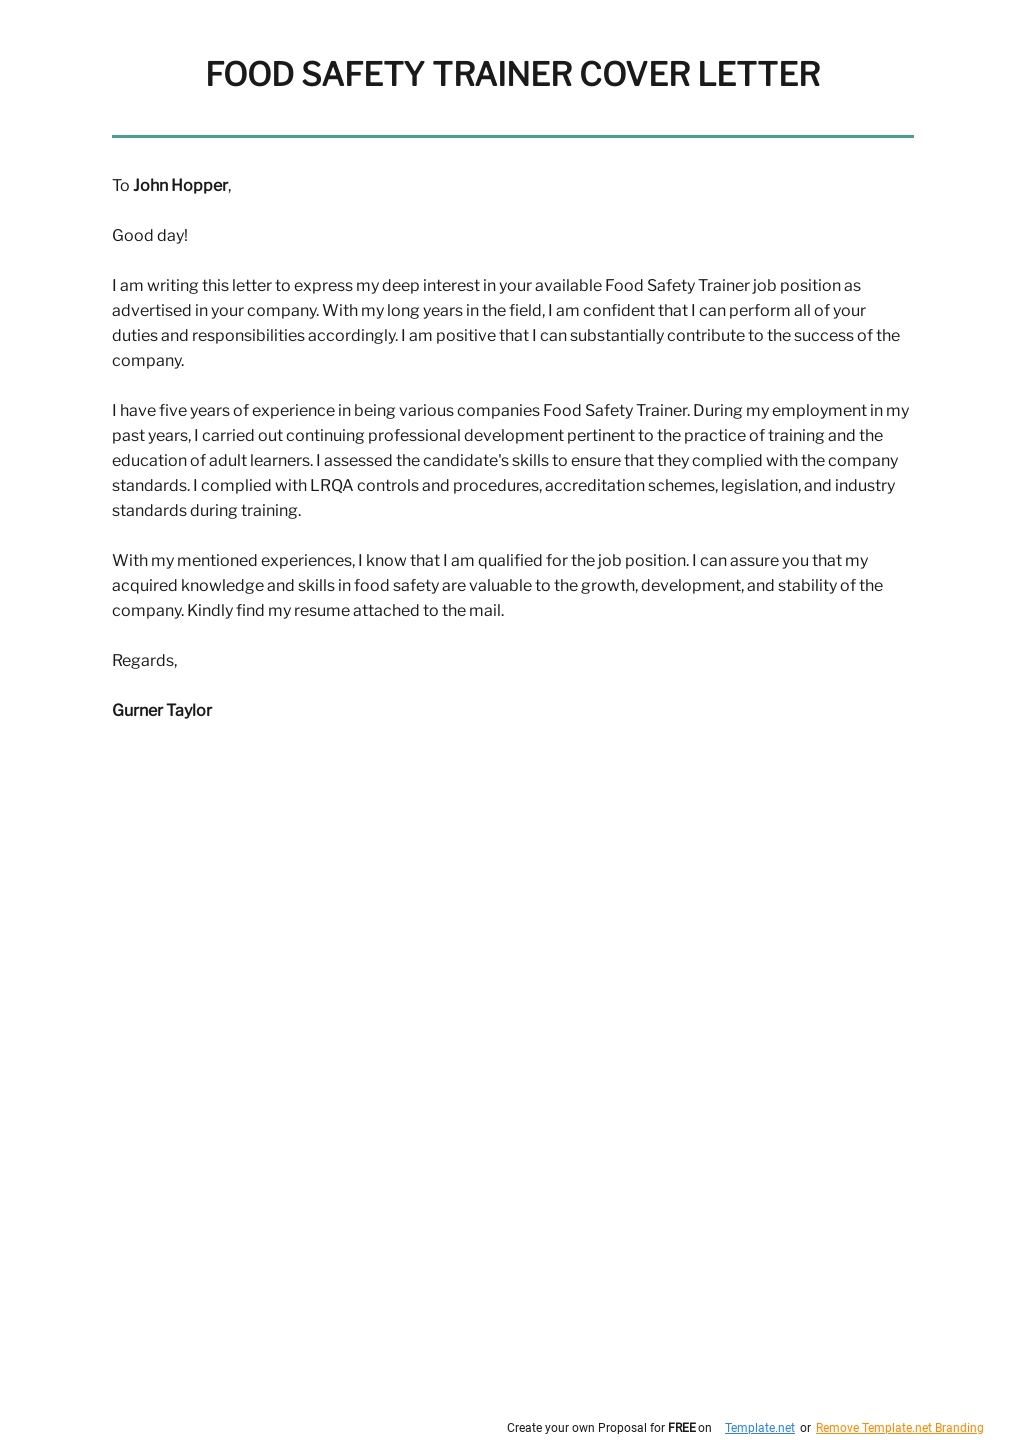 Food Safety Trainer Cover Letter Template.jpe